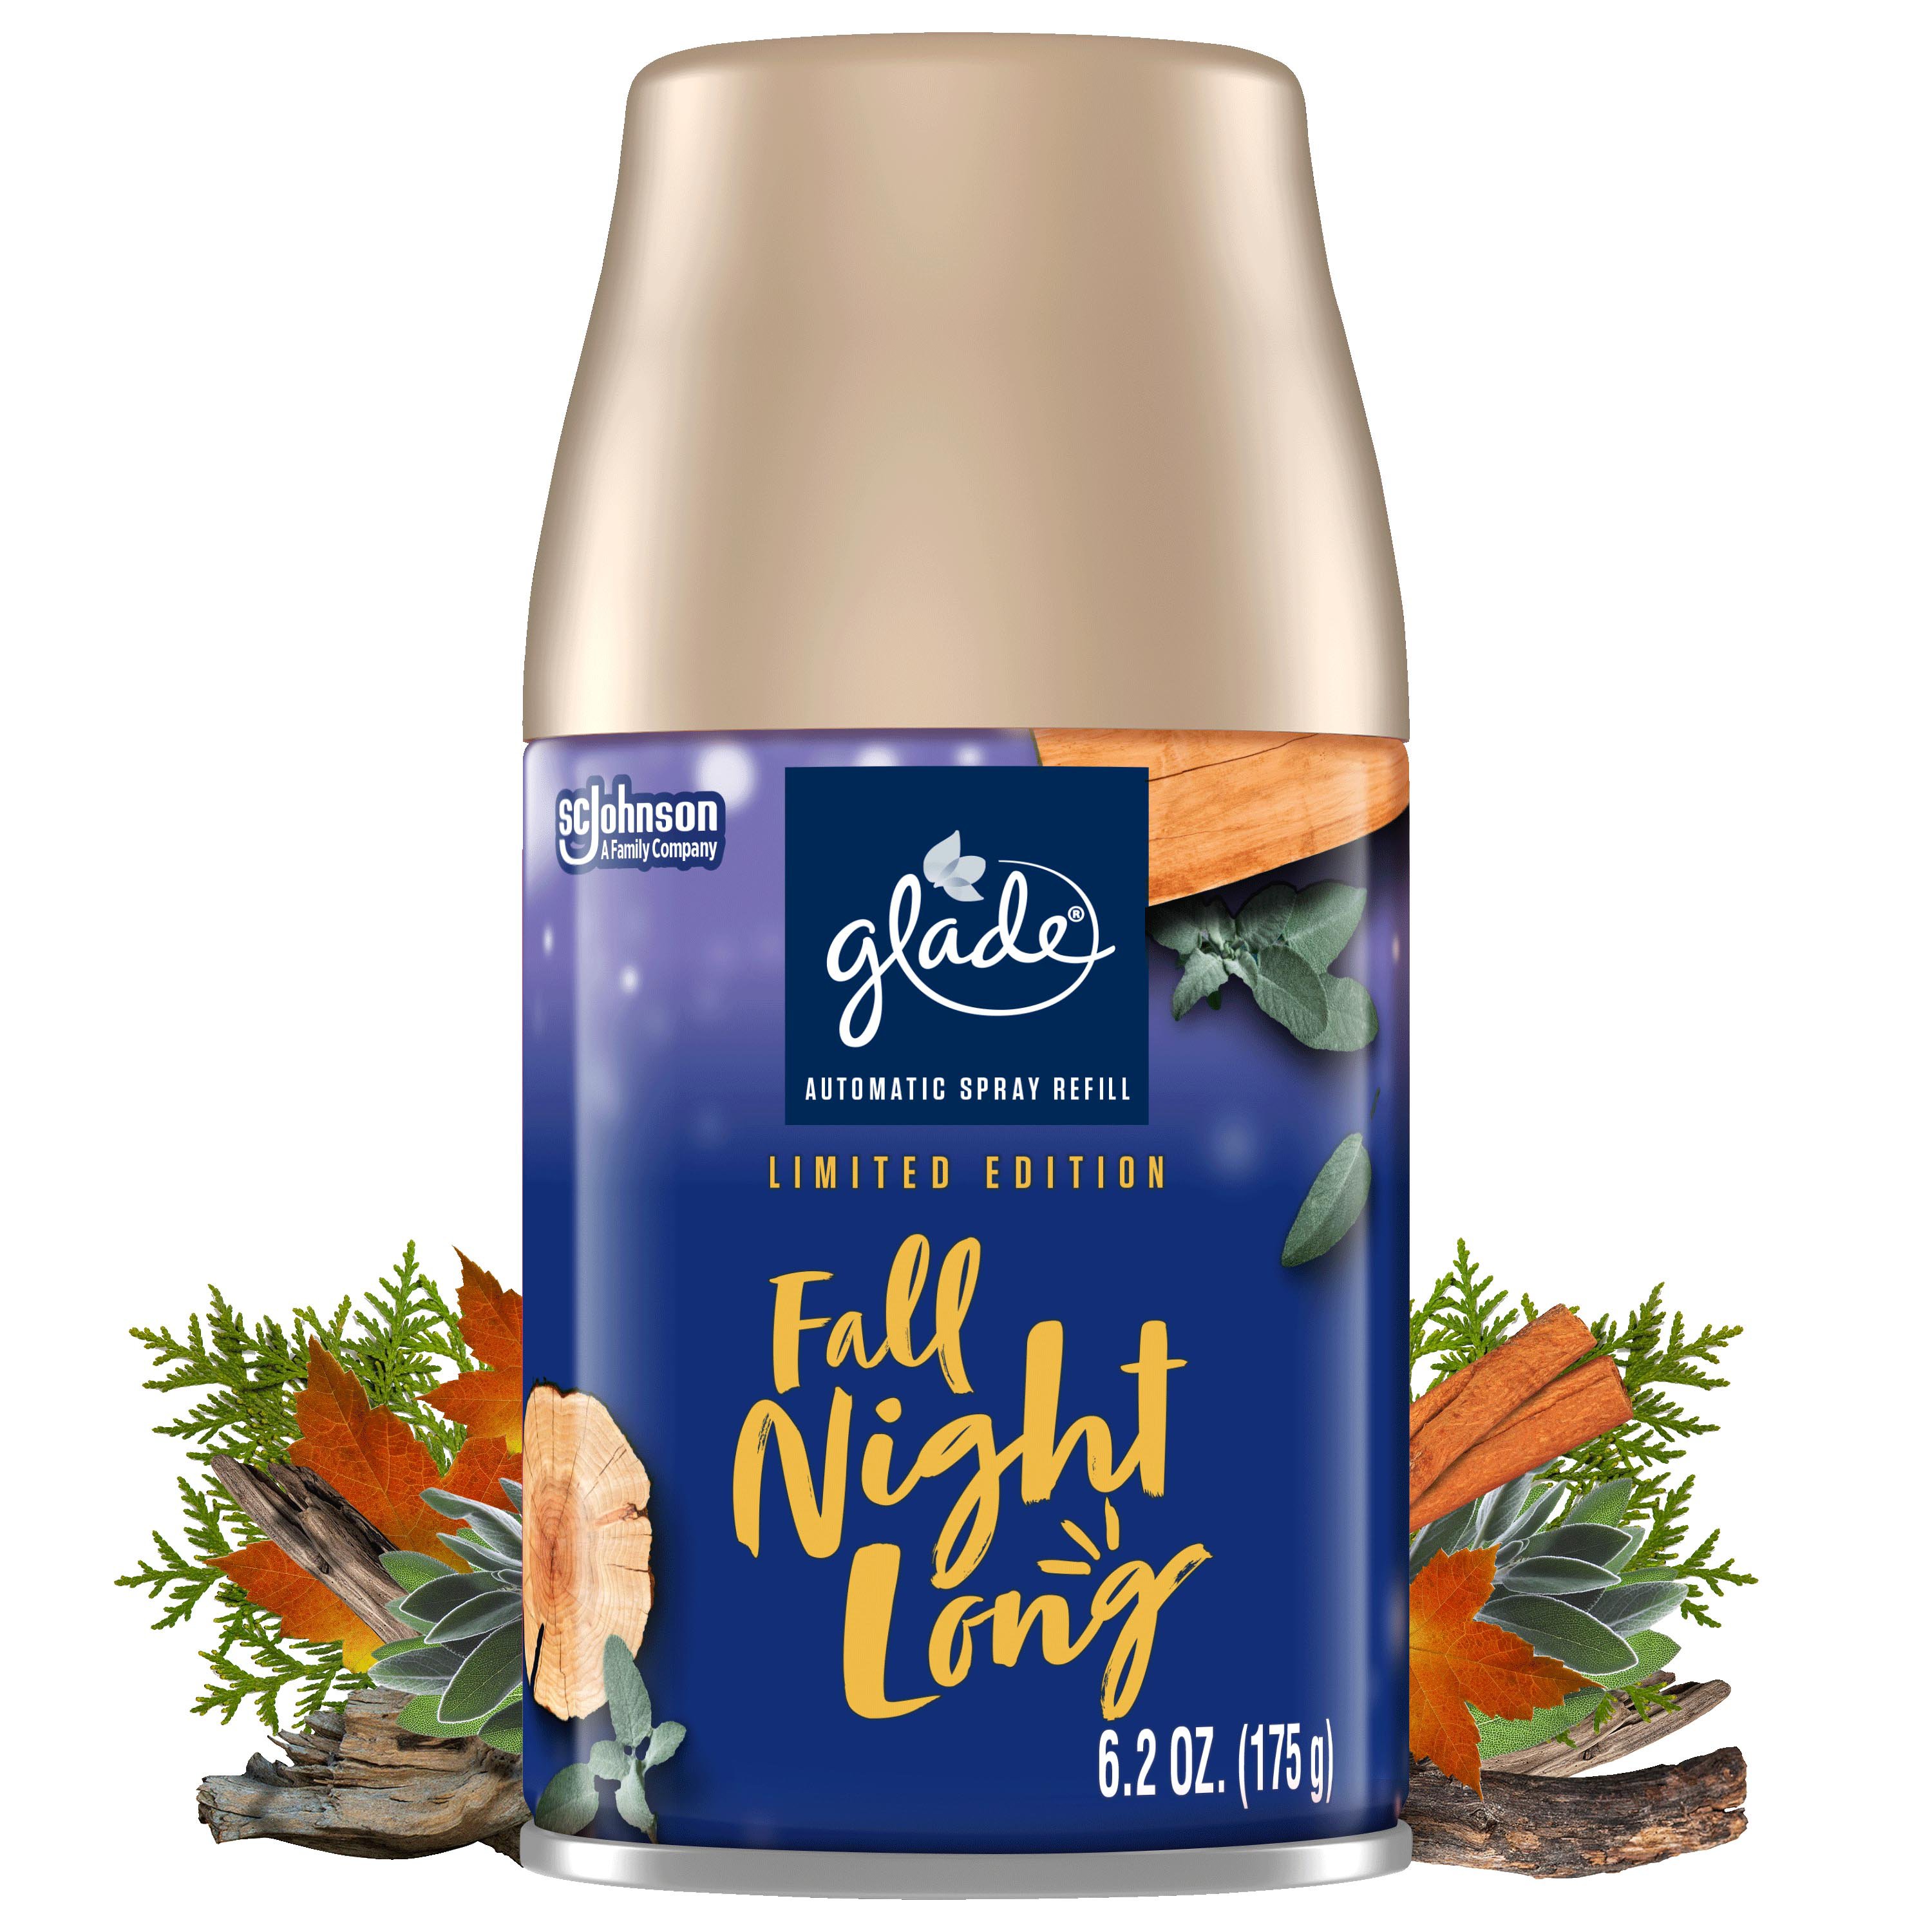 Glade Fall Night Long Automatic Spray Refill Shop Air Fresheners at HEB